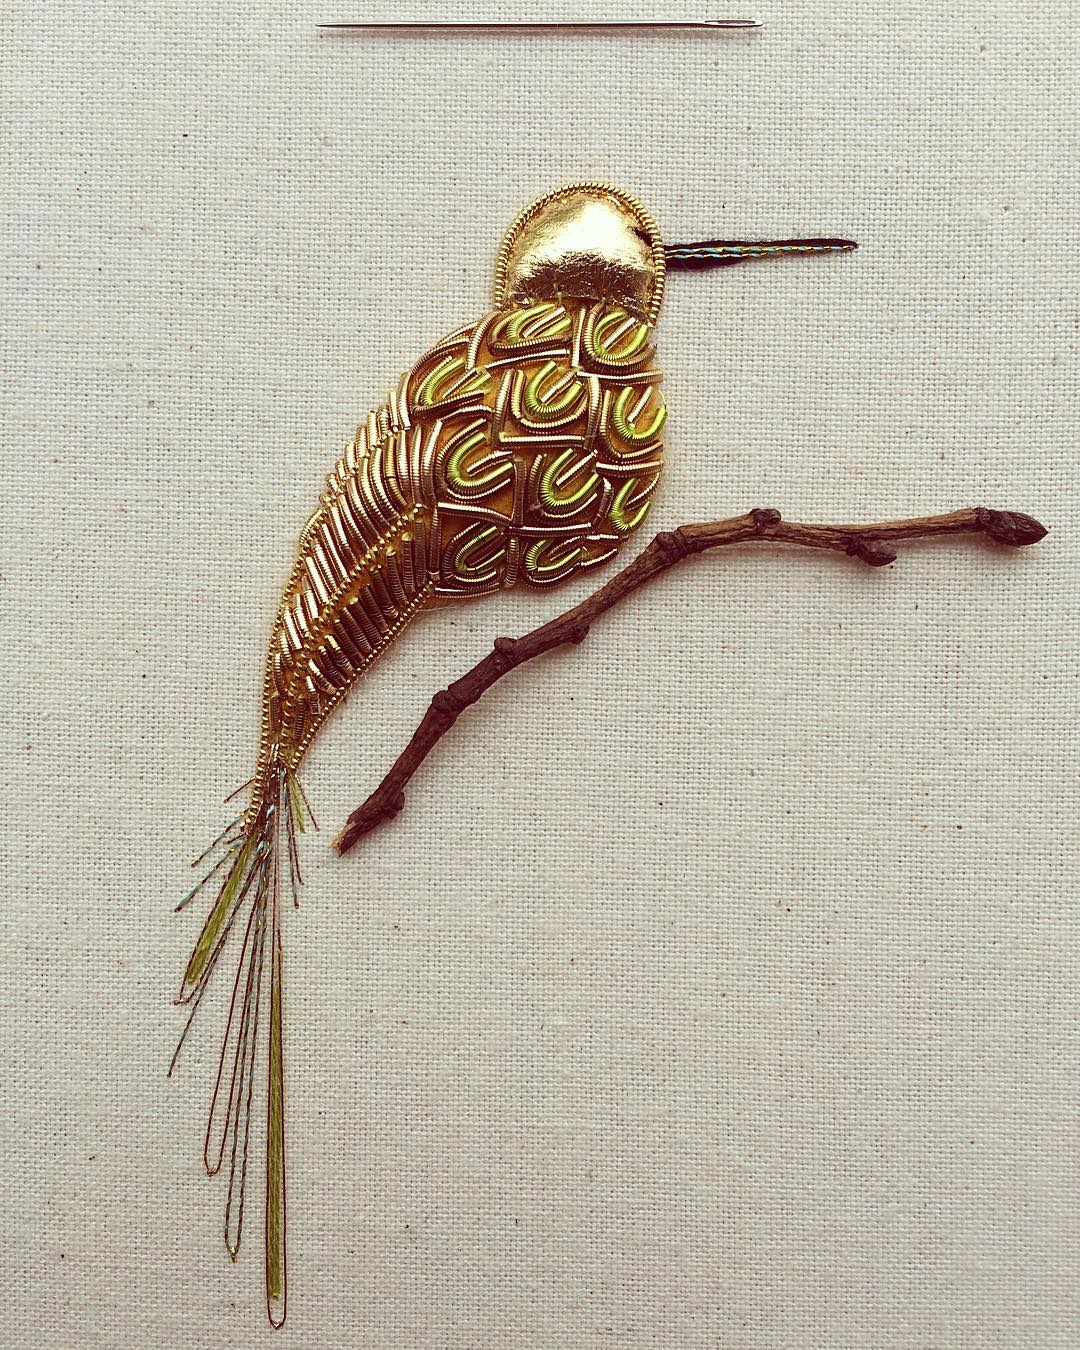 Beautiful Bird And Insect Embroideries Decorated With Metallic Beads By Humayrah Bint Altaf 5